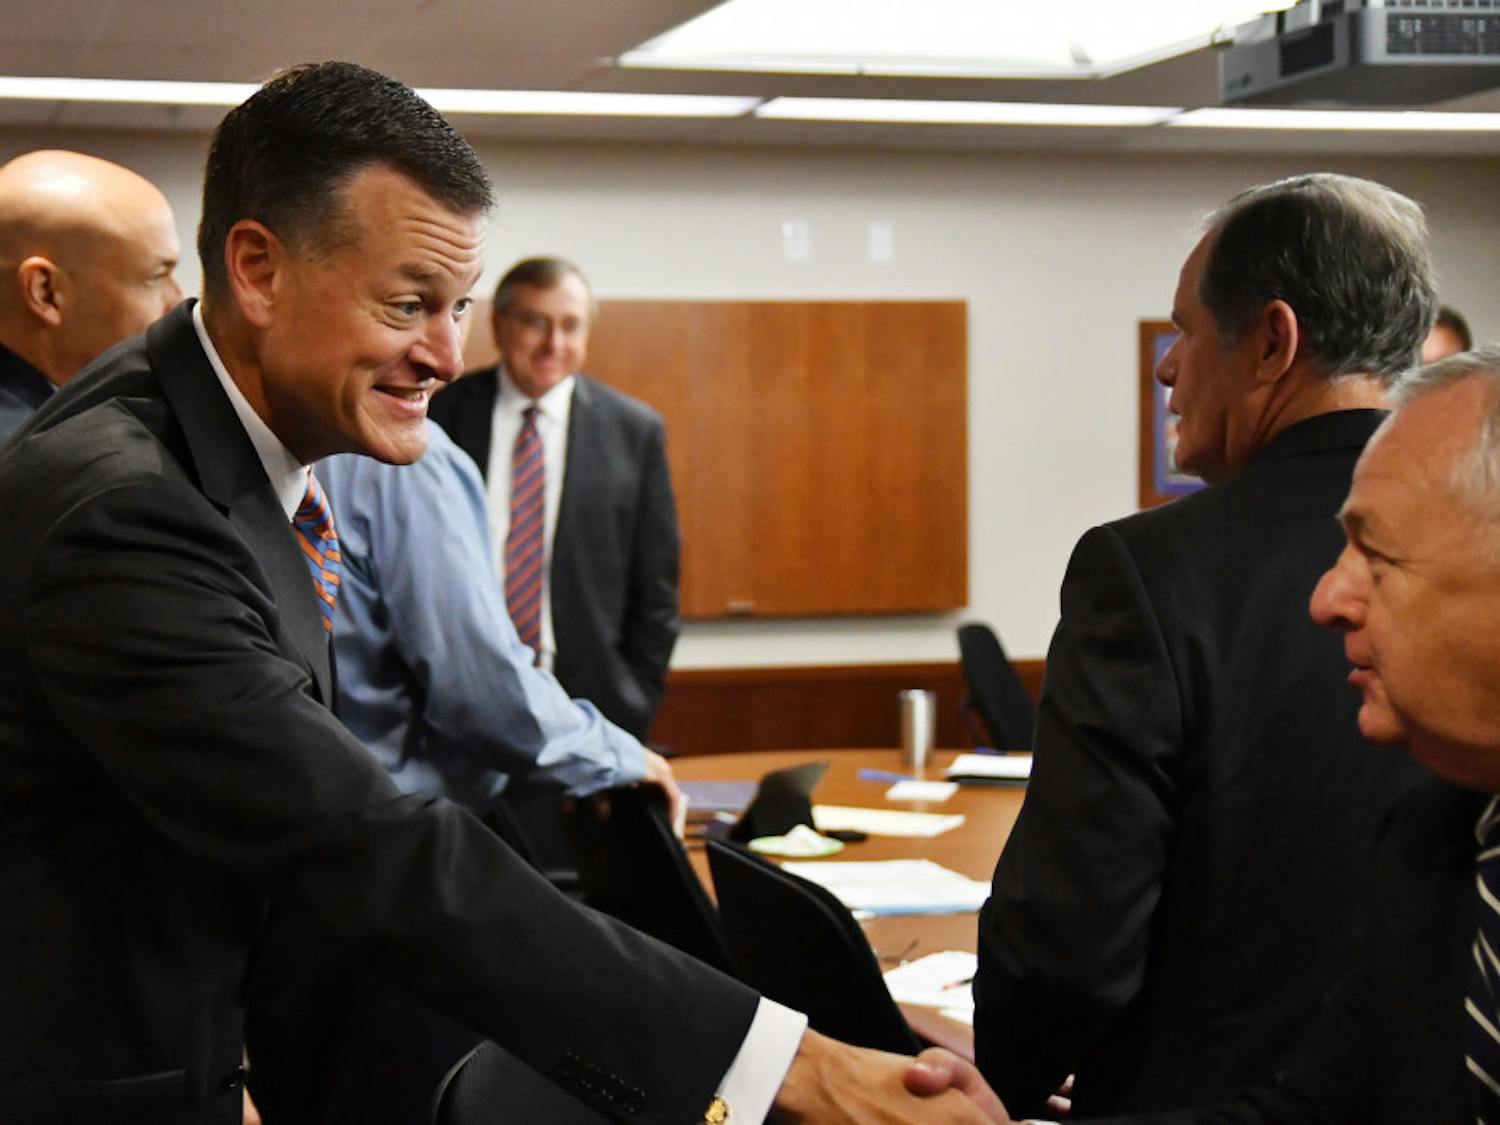 Scott Stricklin (left) greets members of the UAA board on Sept. 27, 2016.